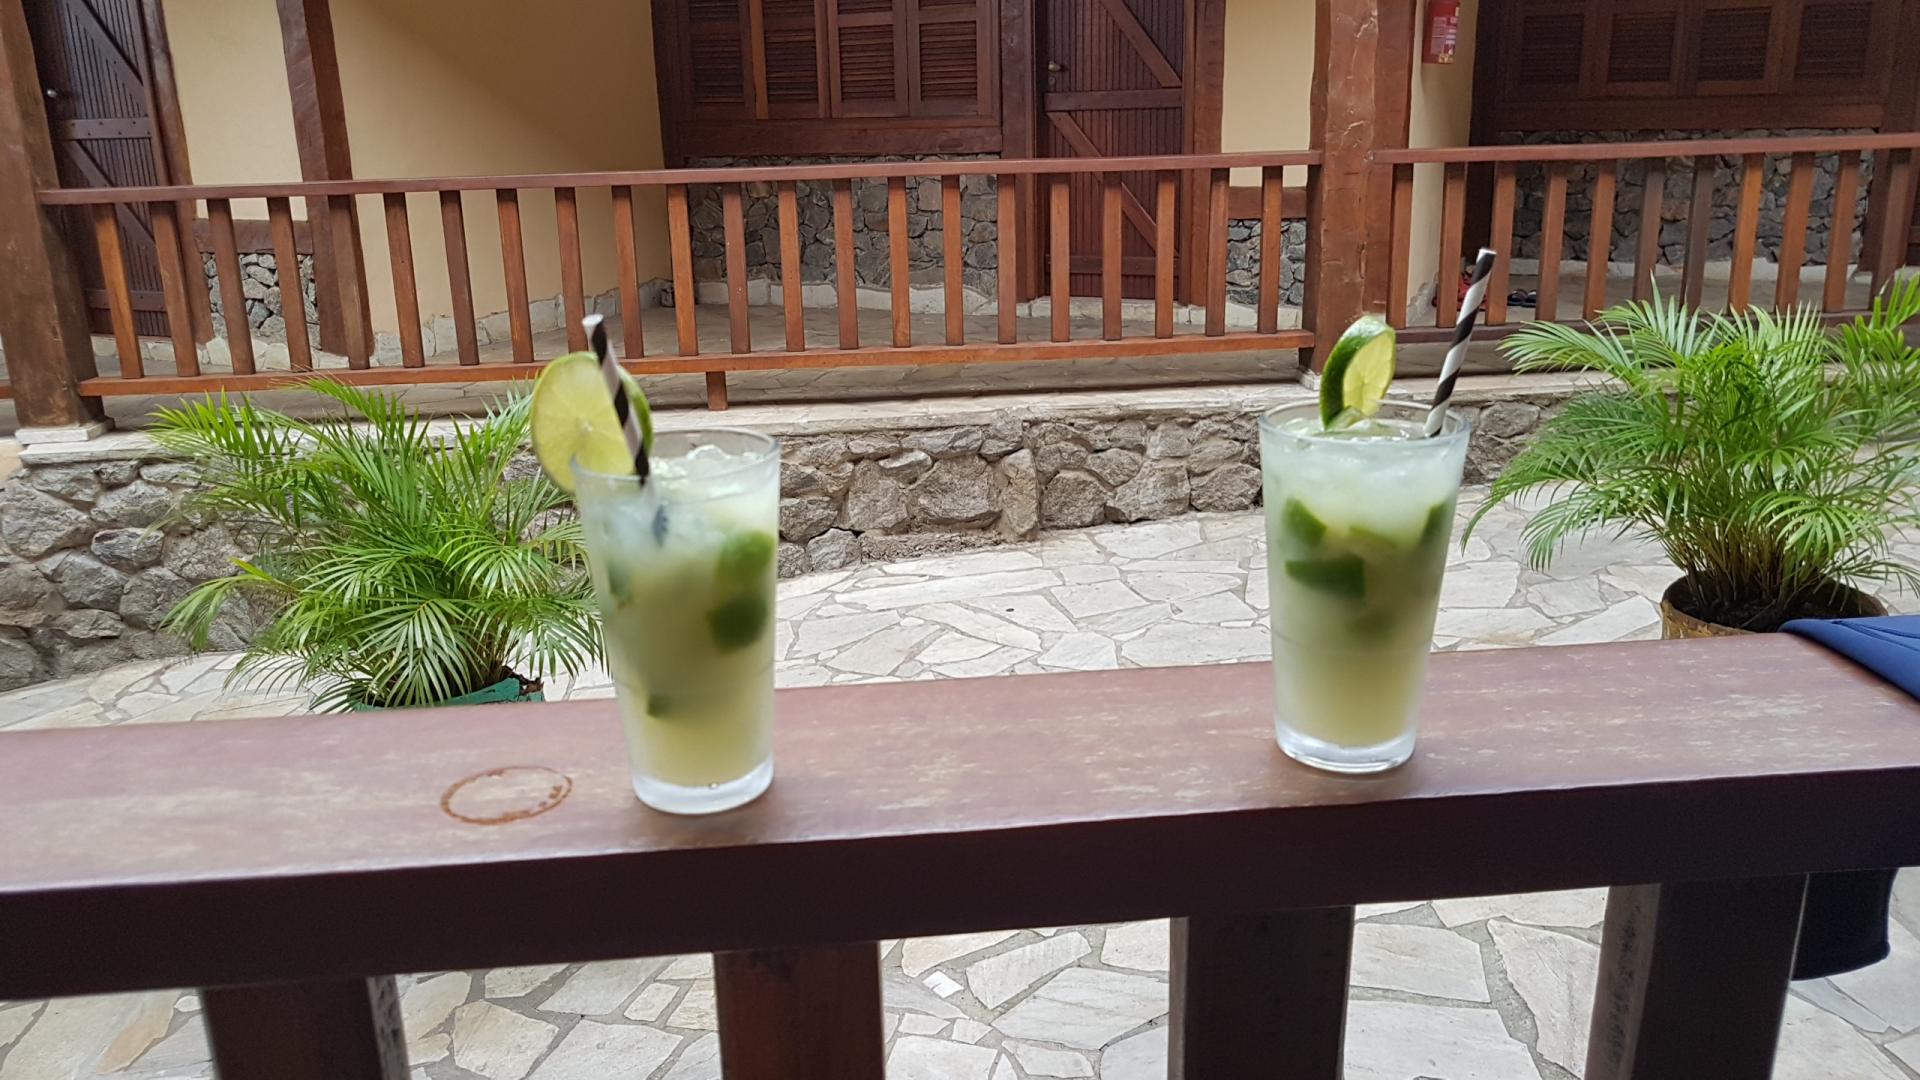 Caipirinha is the most famous alcoholic cocktail in Brazil